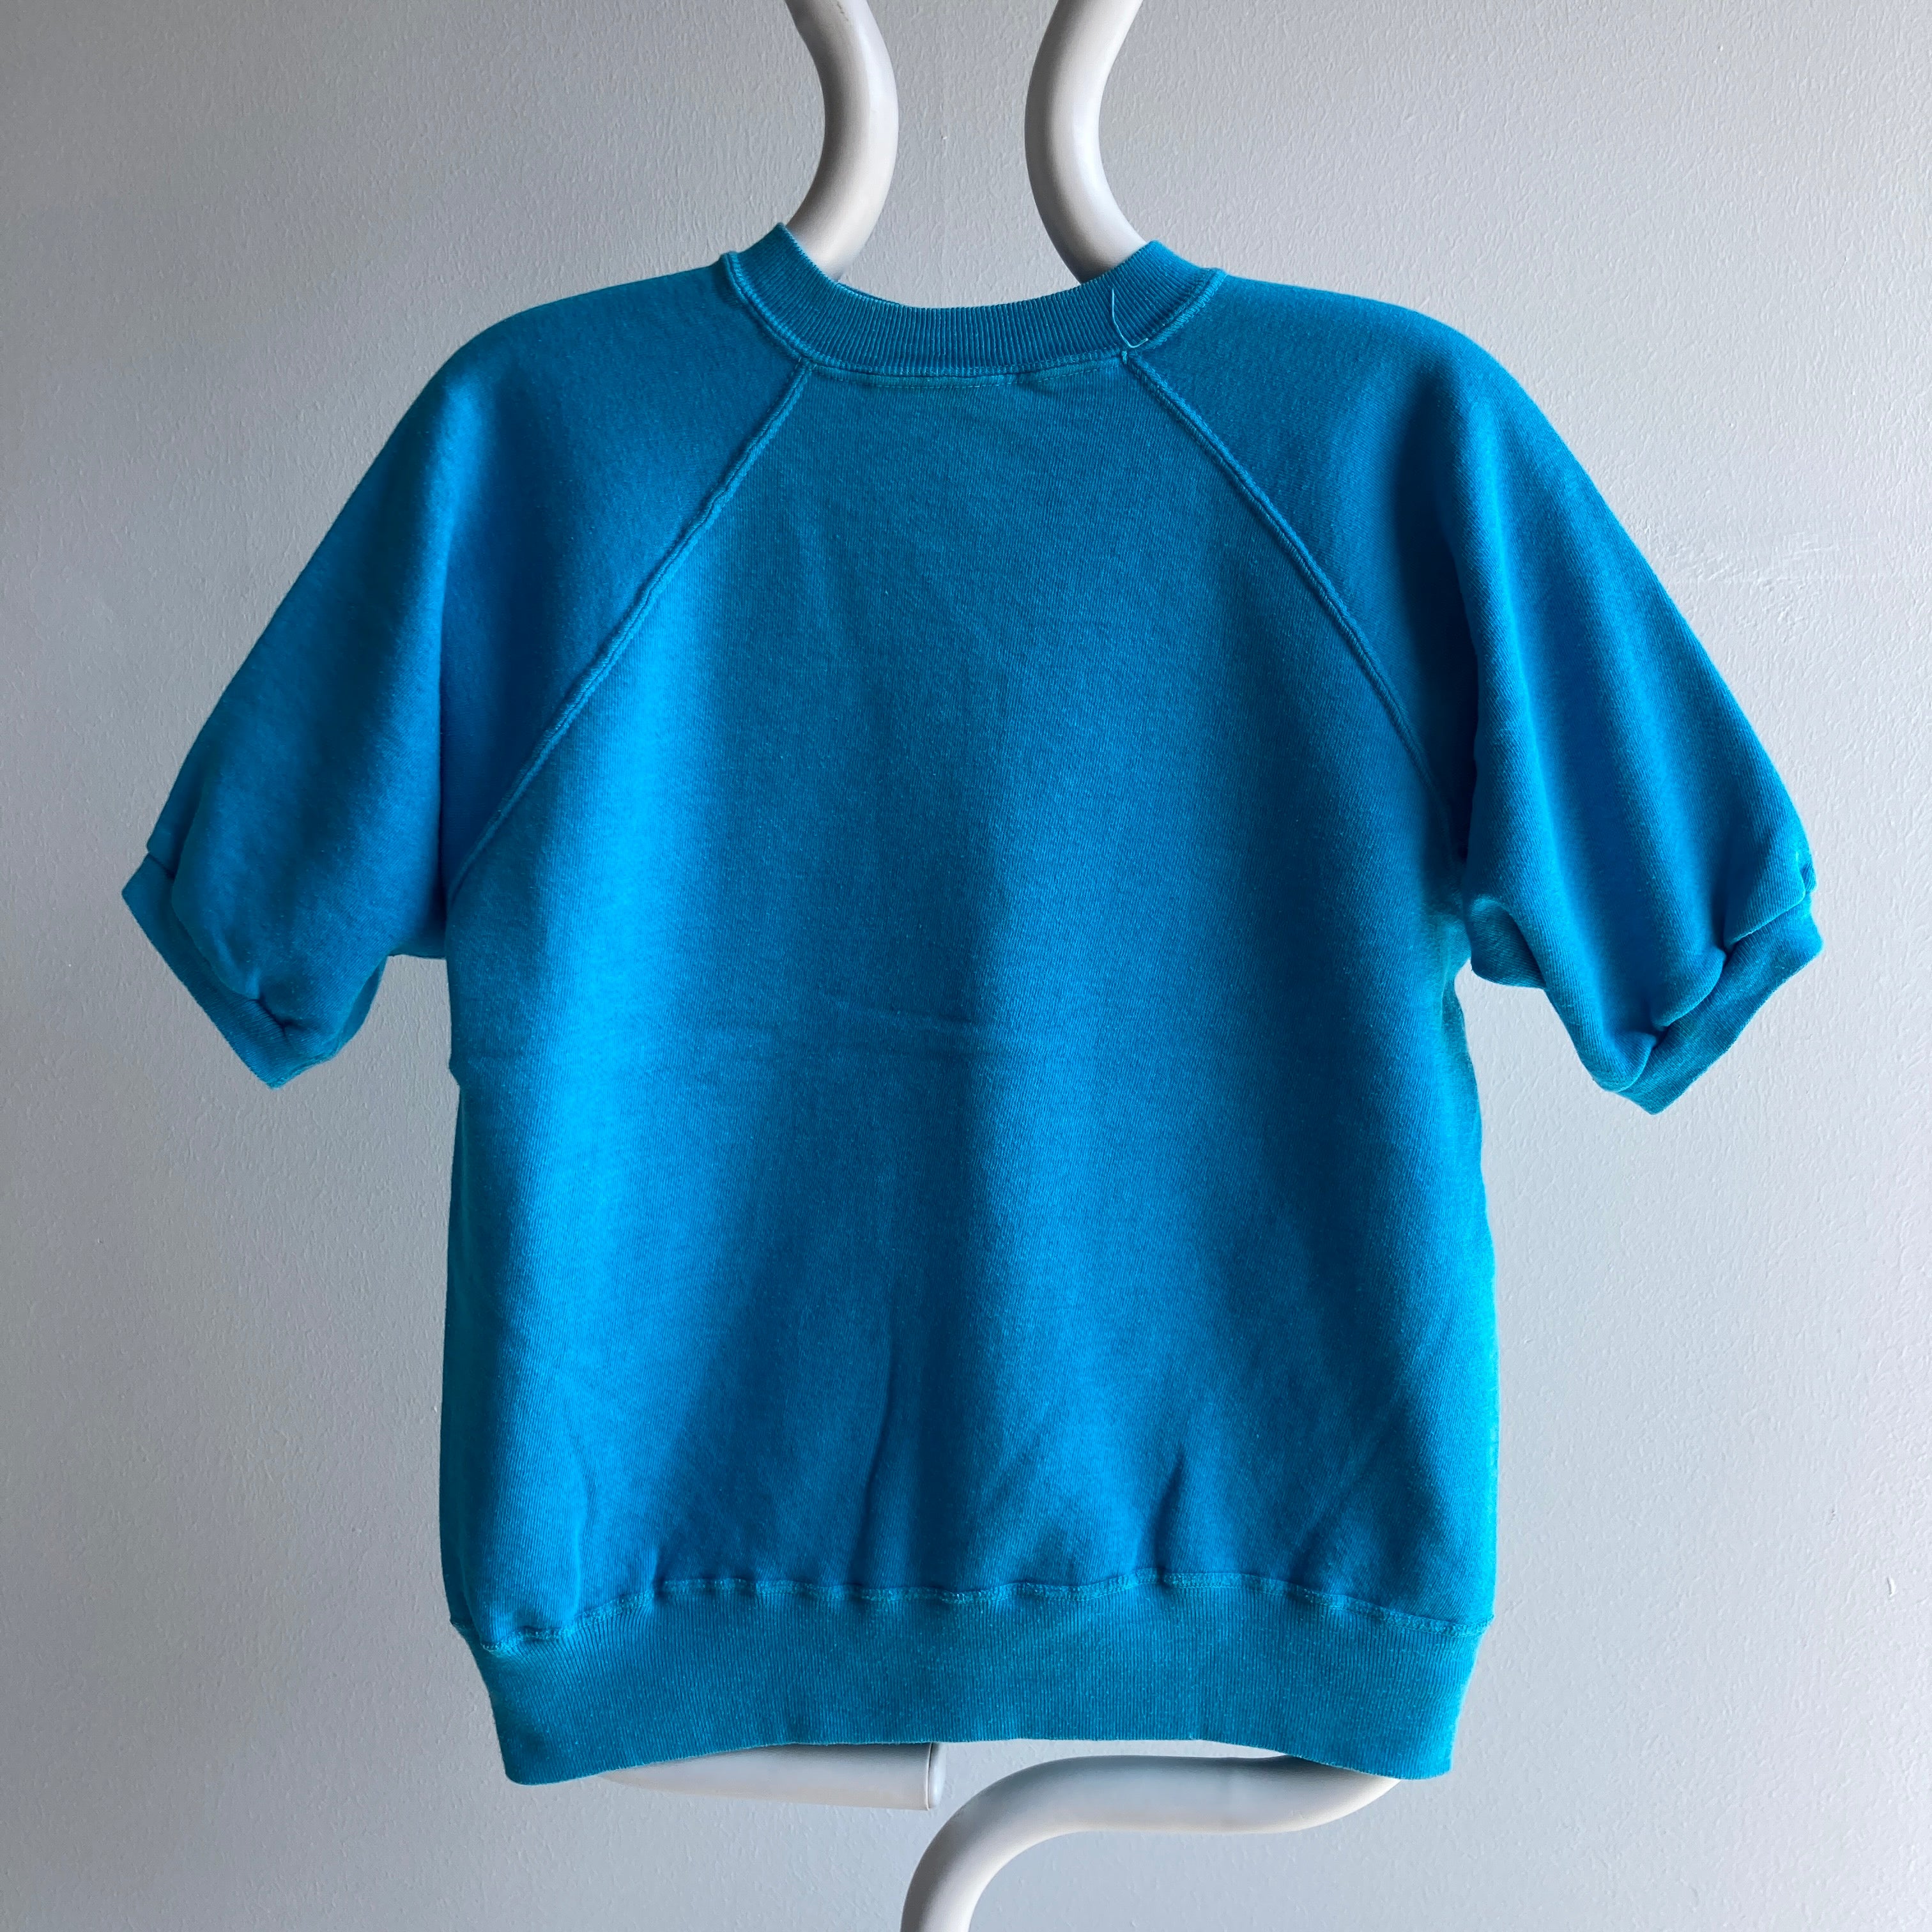 Vintage 50/60s Hanes Teal Warm Up - A RELIC!